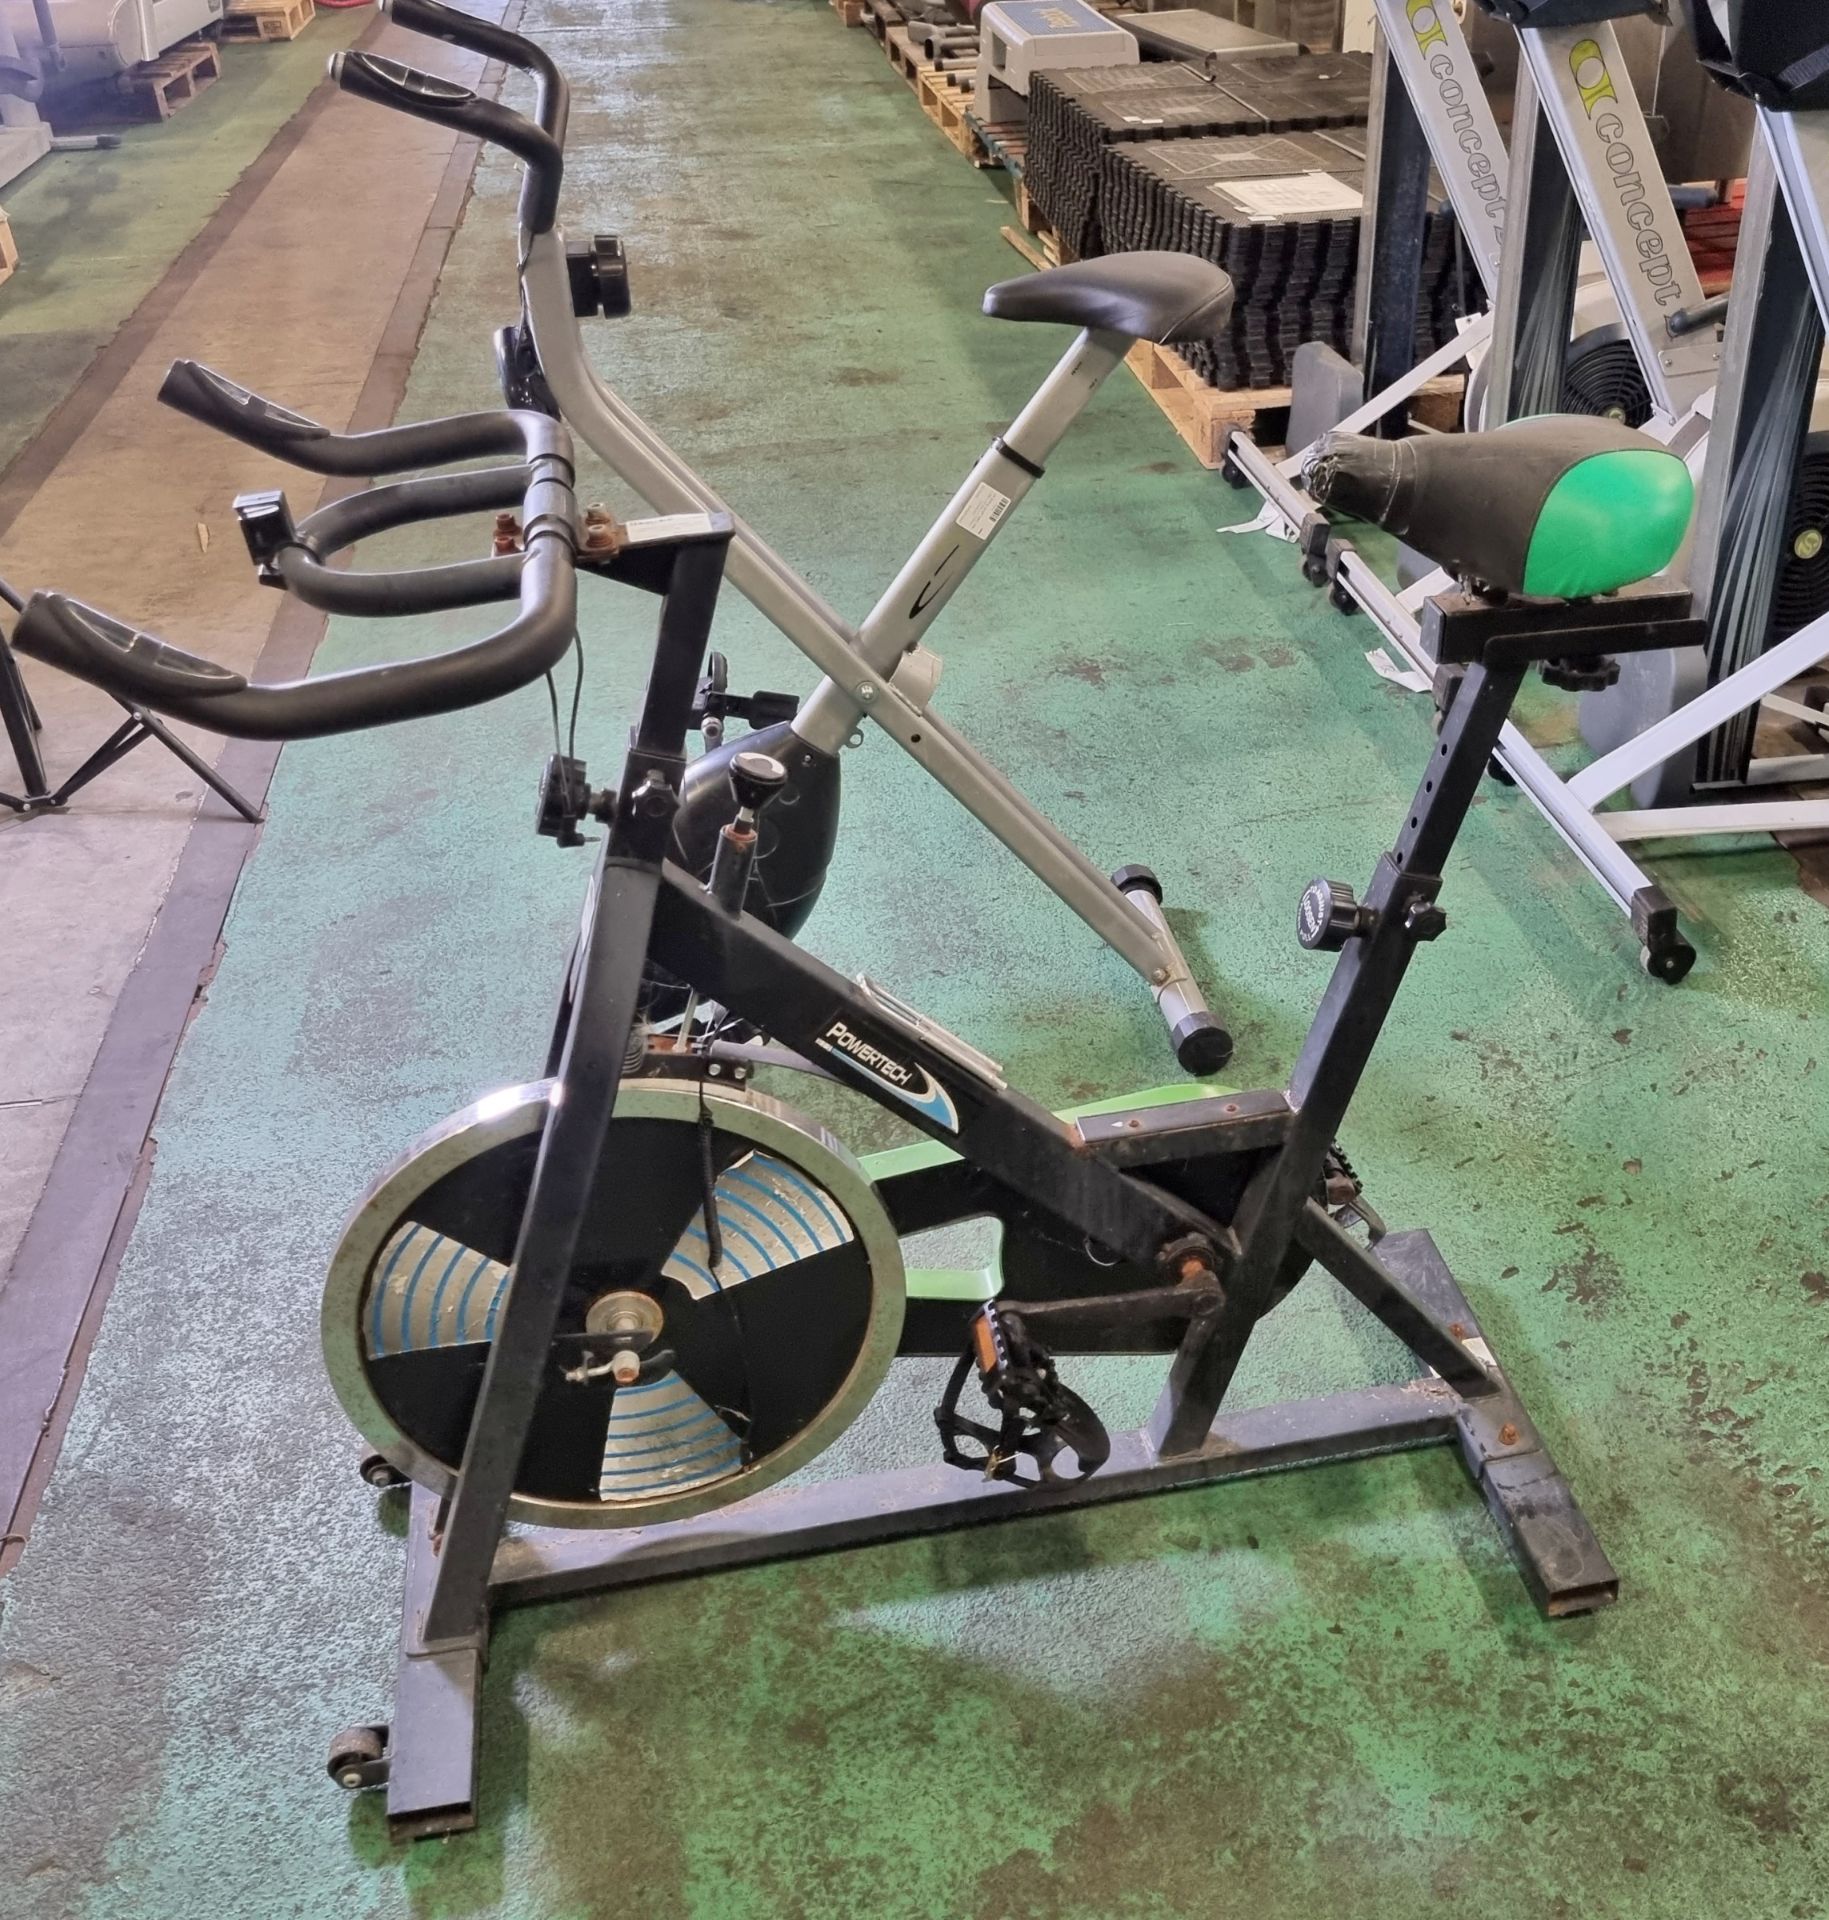 2x static exercise bikes - AS SPARES OR REPAIRS - Full details in the description - Image 2 of 9